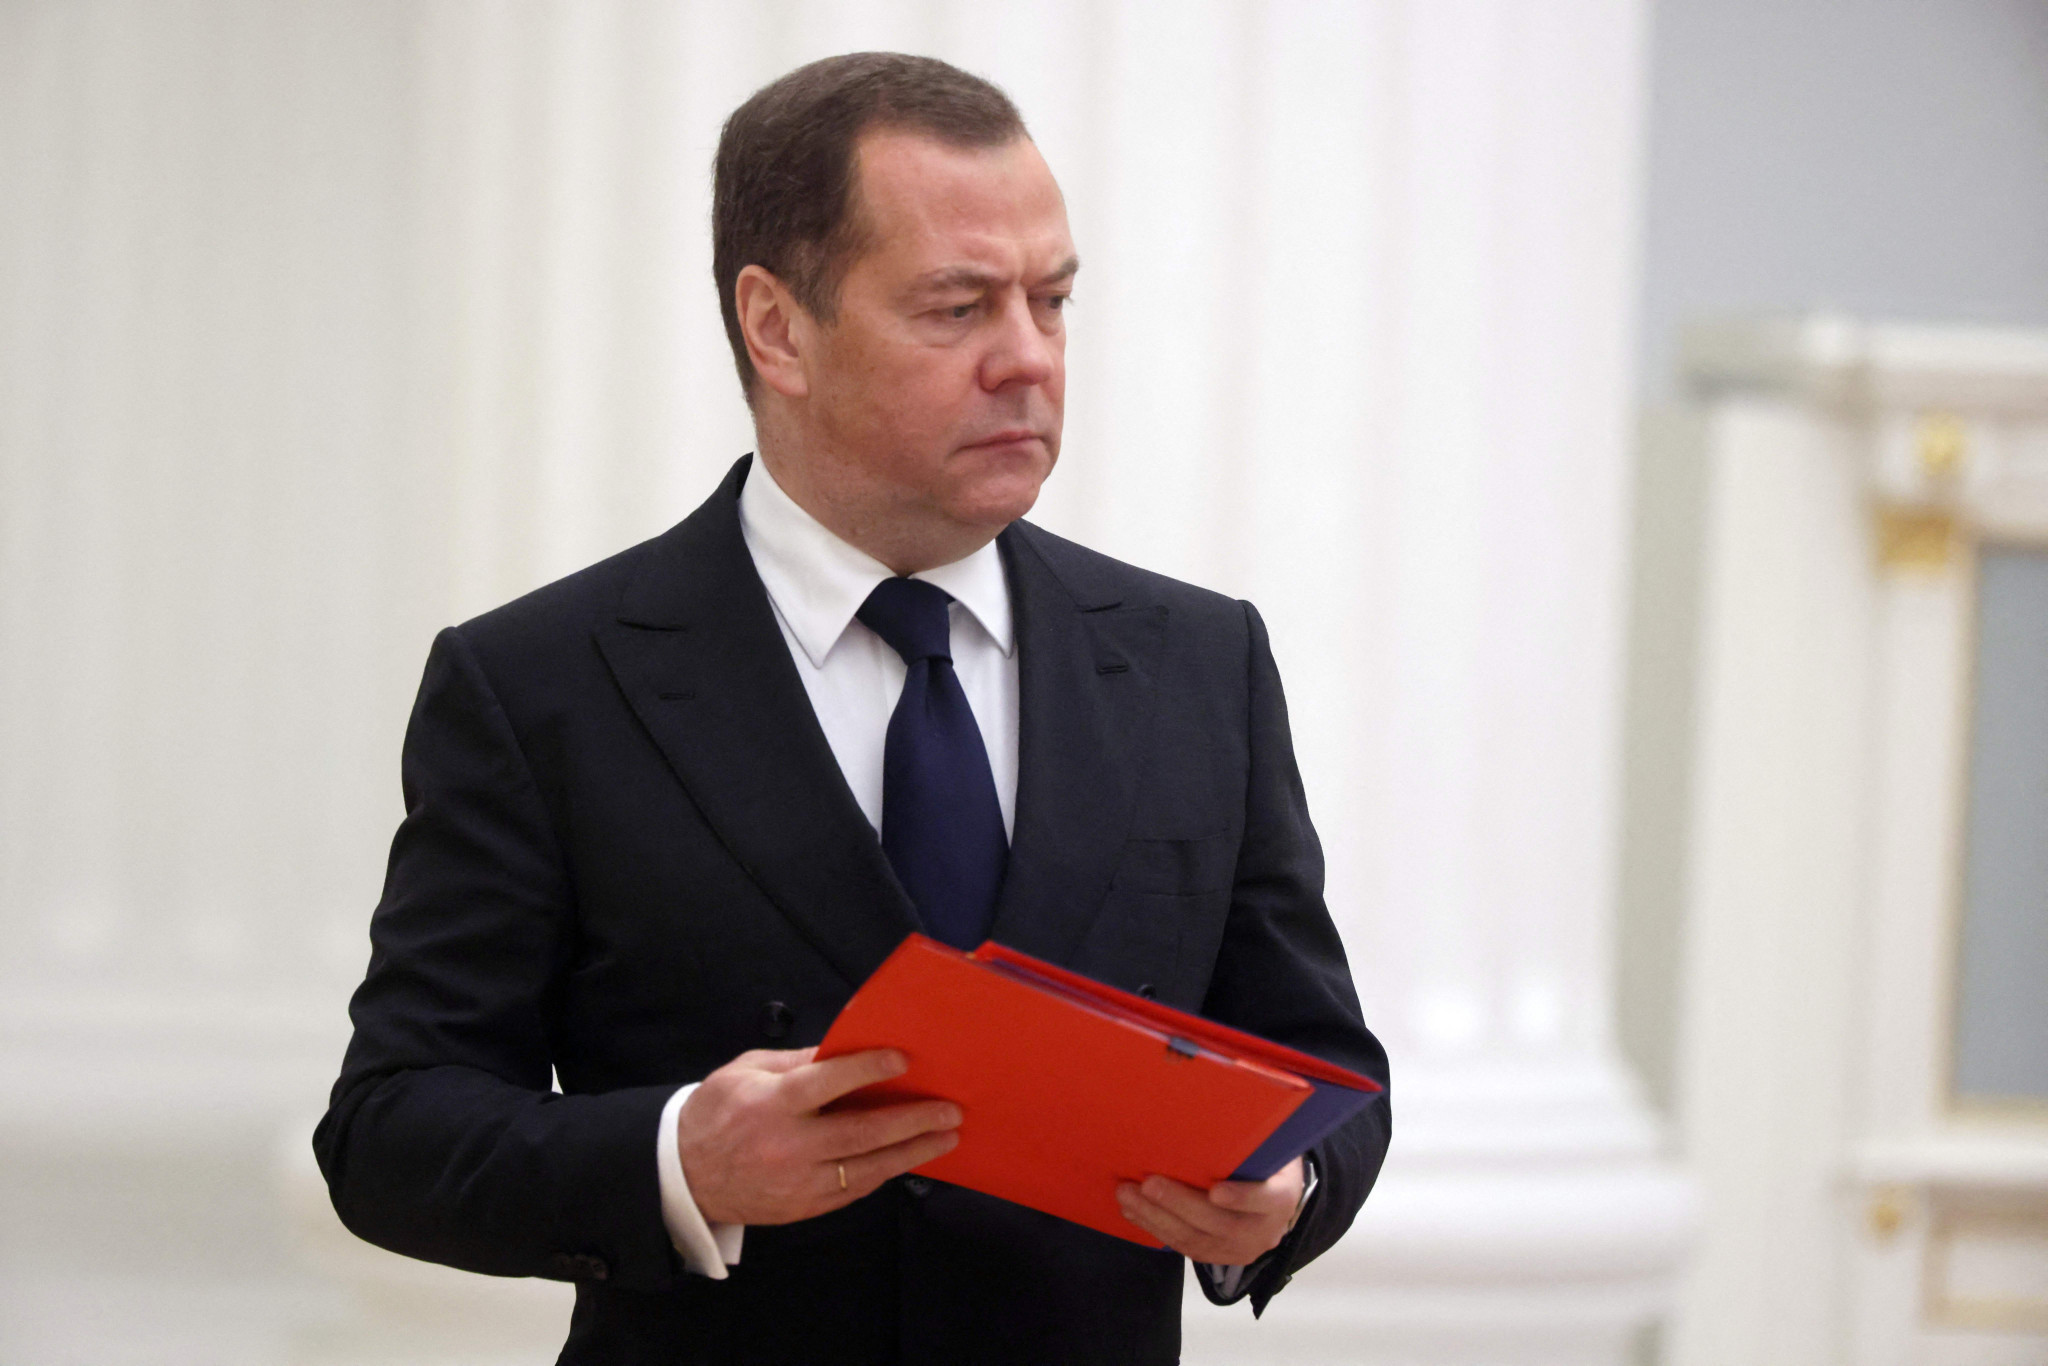 Former Russian President Medvedev claims sports could move to Asia where level is "high"